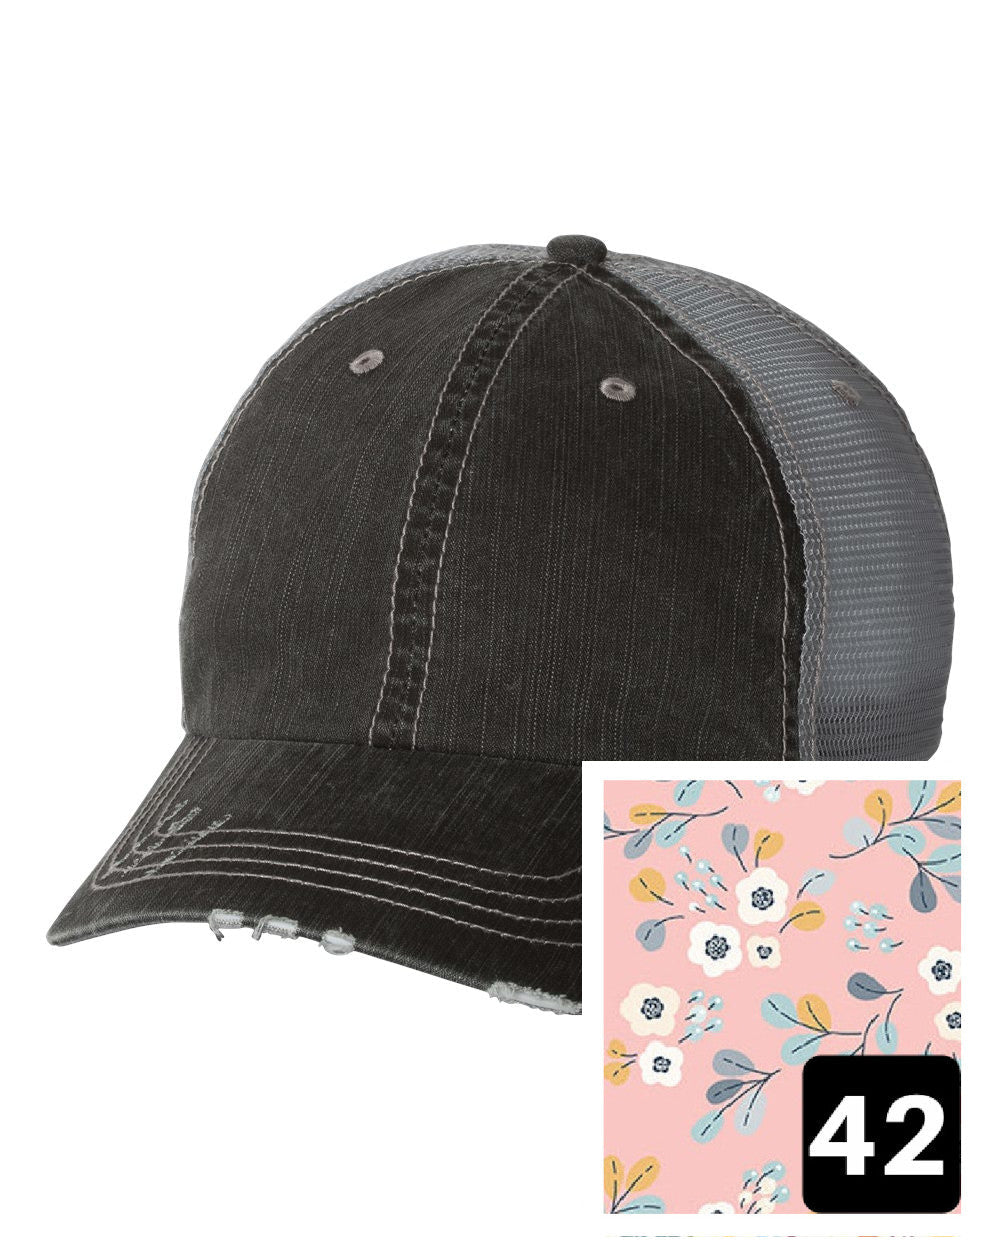 gray distressed trucker hat with light blue and pink mosaic fabric state of Indiana